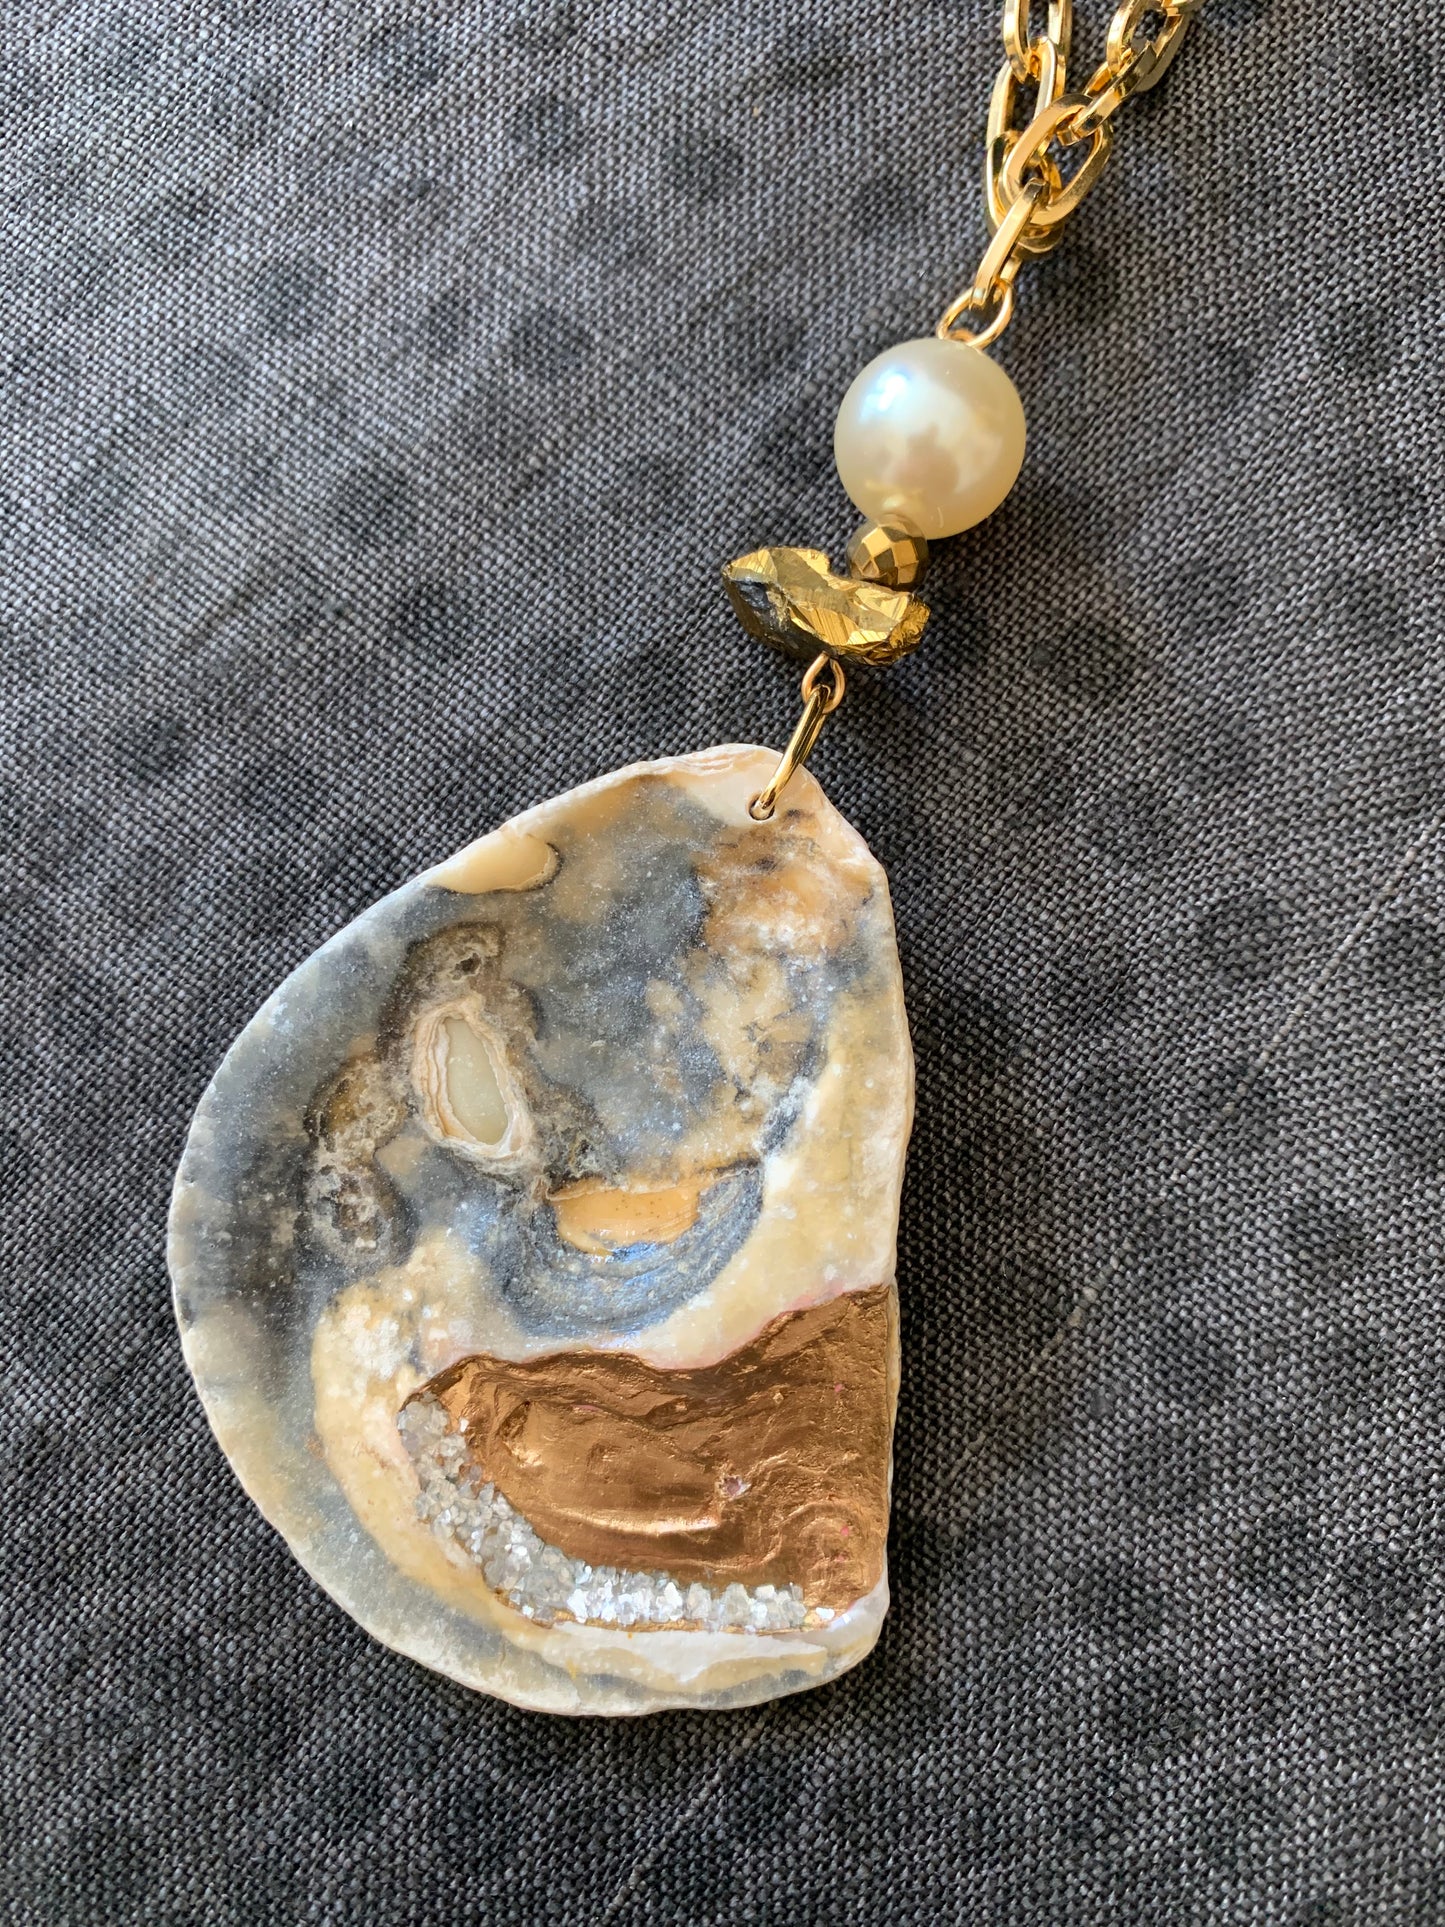 Handmade Oyster & Pearl Seashell Necklace, One of a Kind